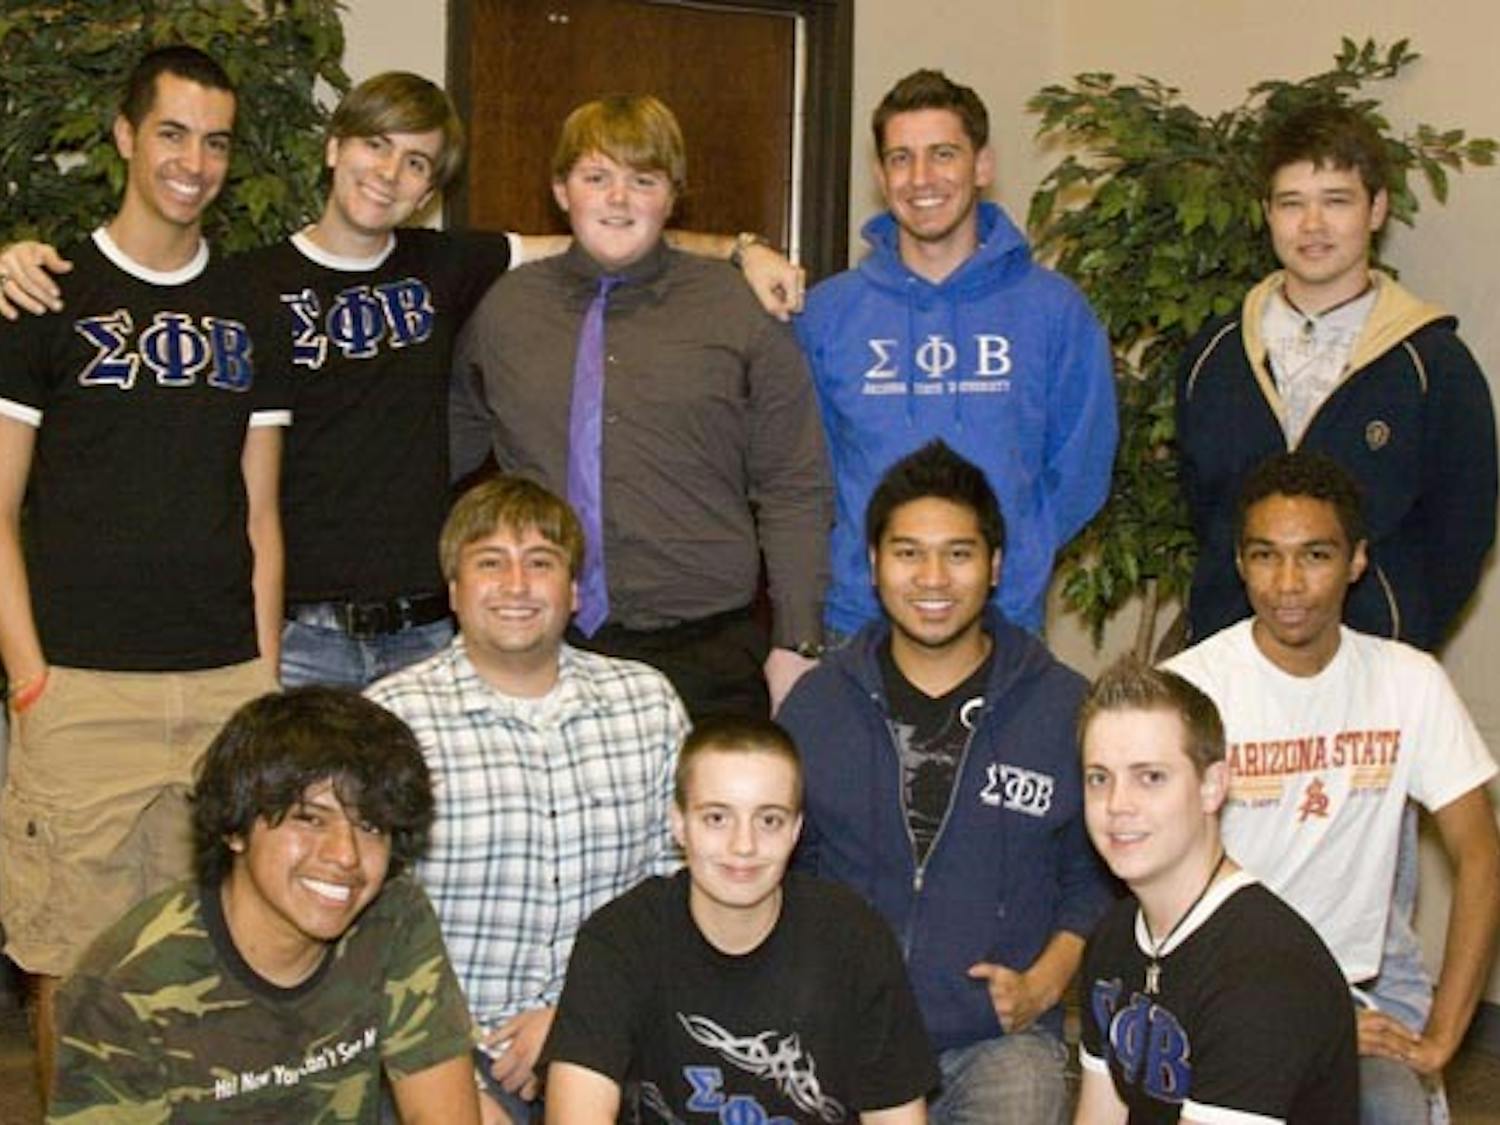 NATIONAL EXPANSION: Sigma Phi Beta, the gay-stratight allied fraternity founded at ASU, will initiate new members at Indian University making it the first successful expansion for the fraternity. (Photo by Annie Wechter)